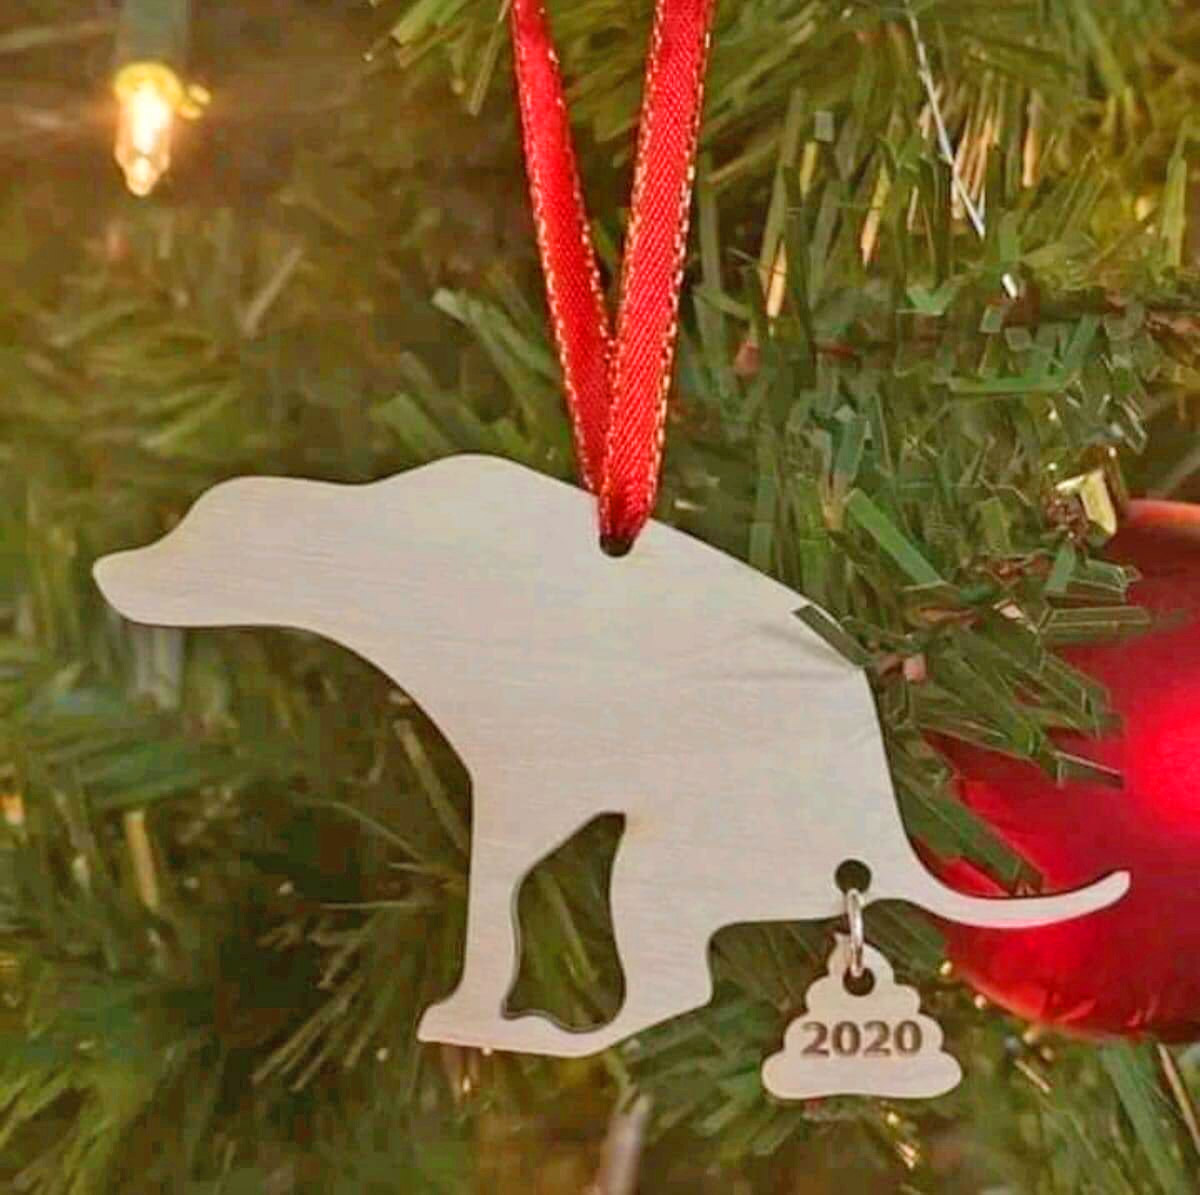 Dog Poop 2020 Christmas Ornament - Funny dog pooping on 2020 ornament